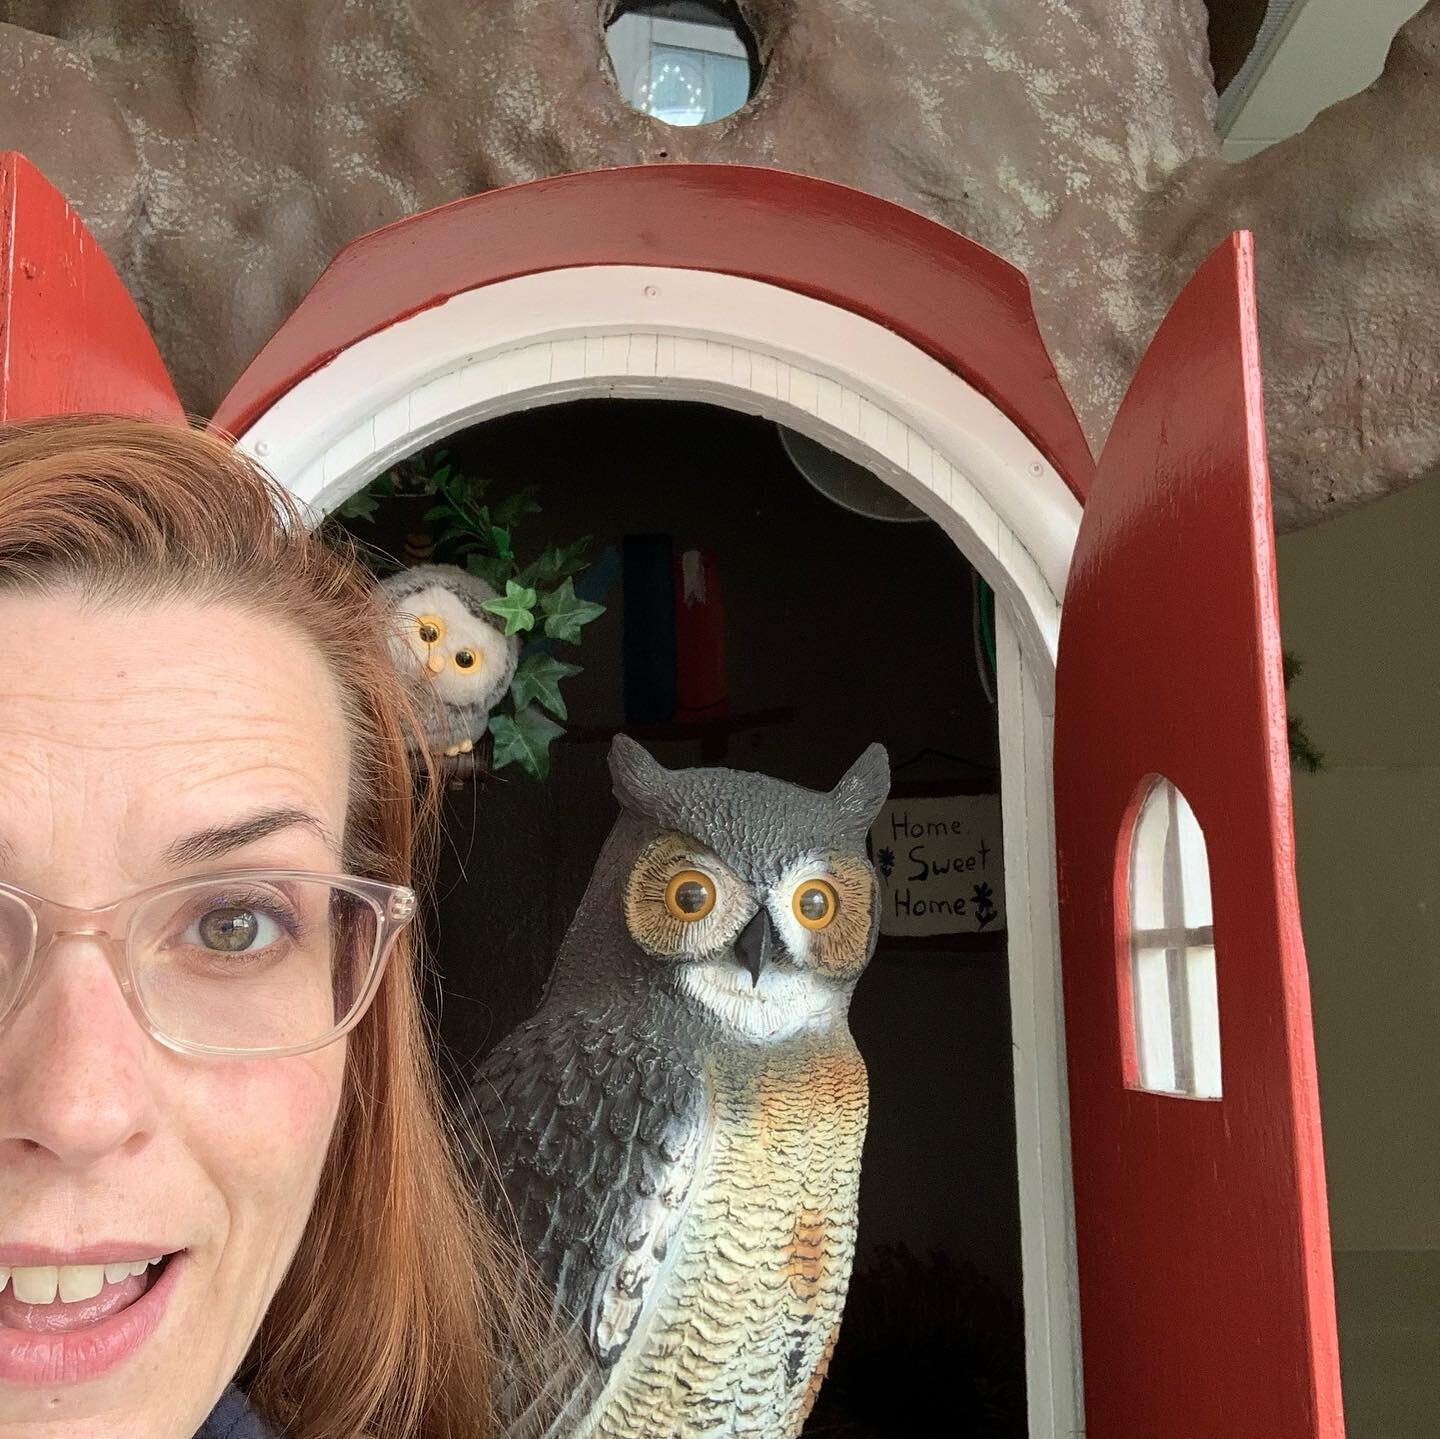 Happy #MuseumSelfieDay to all who celebrate!⁣⁣⁣⁣⁣⁣⁣
⁣
1 It was so nice to catch up with Mrs. Owl this summer at the @ConfedCentre art gallery ⁣⁣⁣⁣
#IYKYK 🌈 #pei⁣⁣⁣⁣
⁣⁣⁣⁣
⁣⁣⁣⁣
2 The Van Gogh 360 traveling exhibit was a neat way to experience his artw